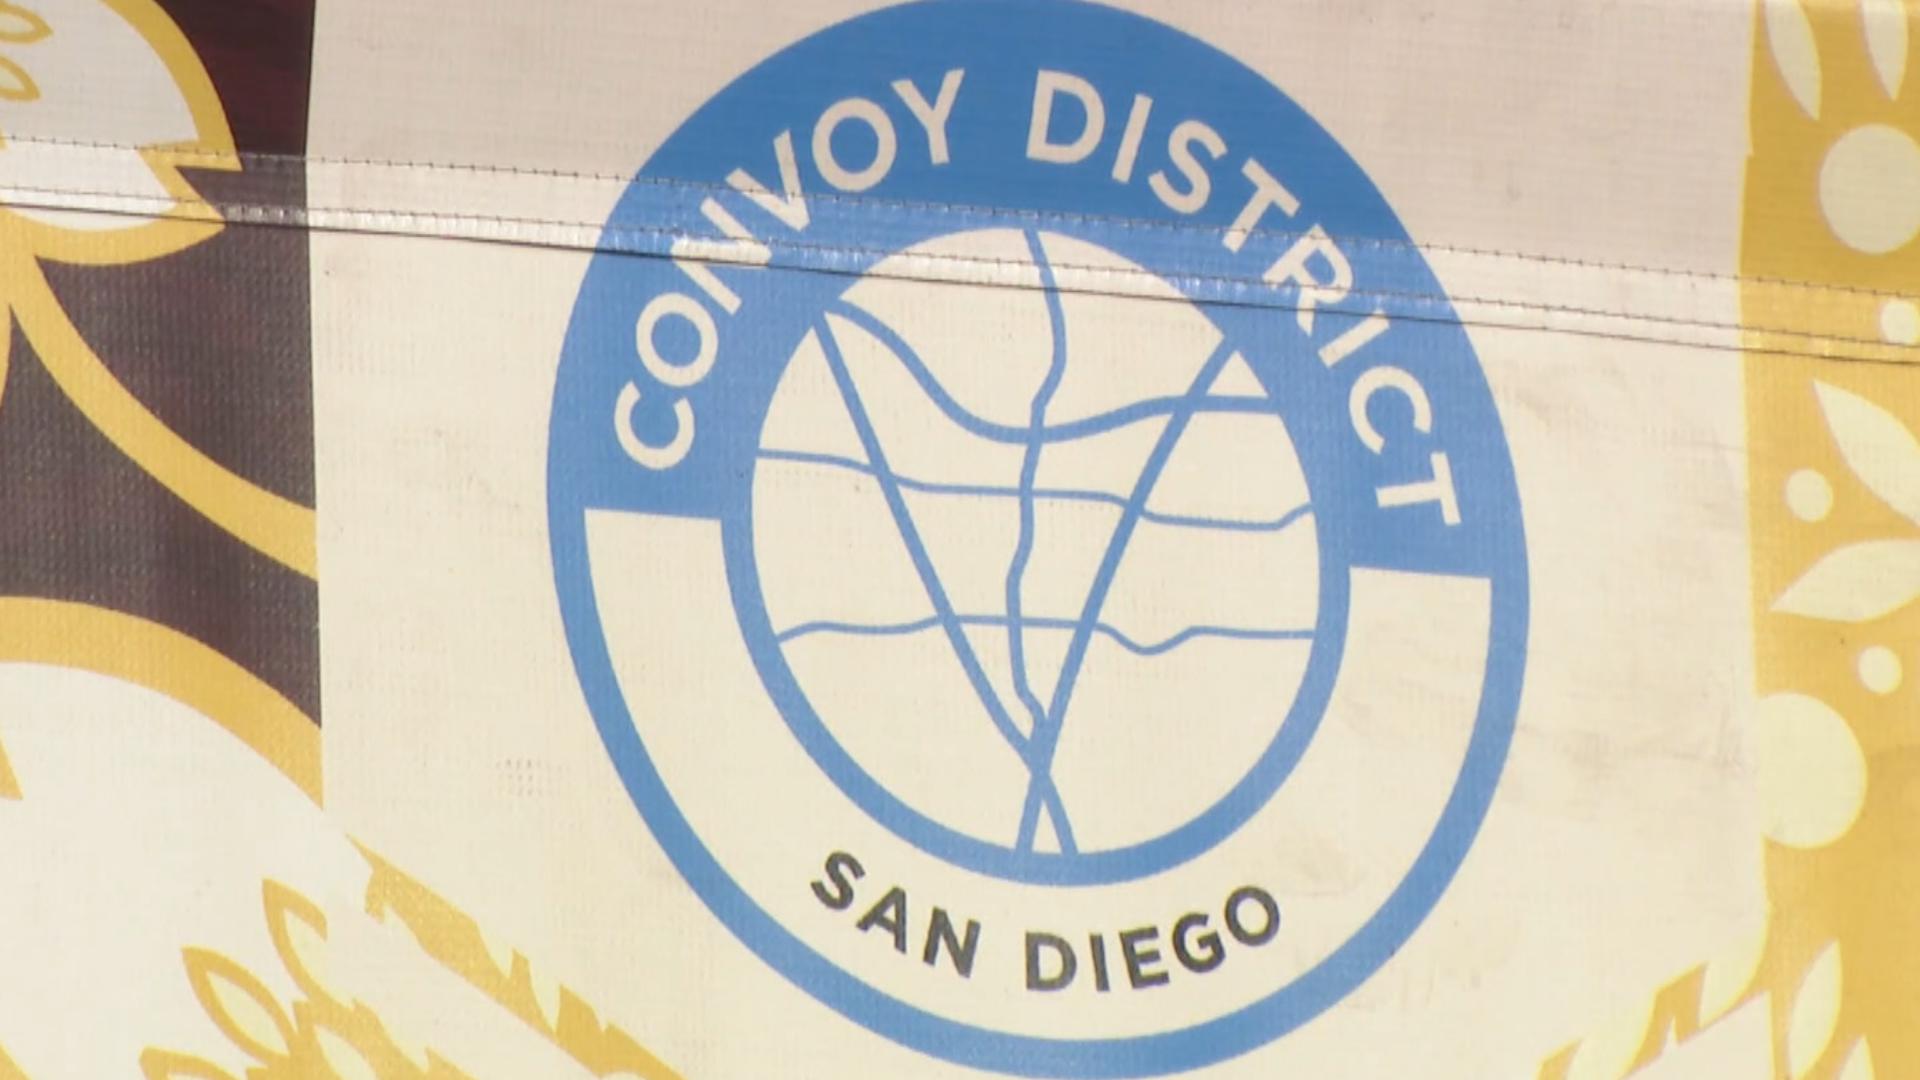 The Convoy District in Kearny Mesa is the heart of San Diego's Asian community.